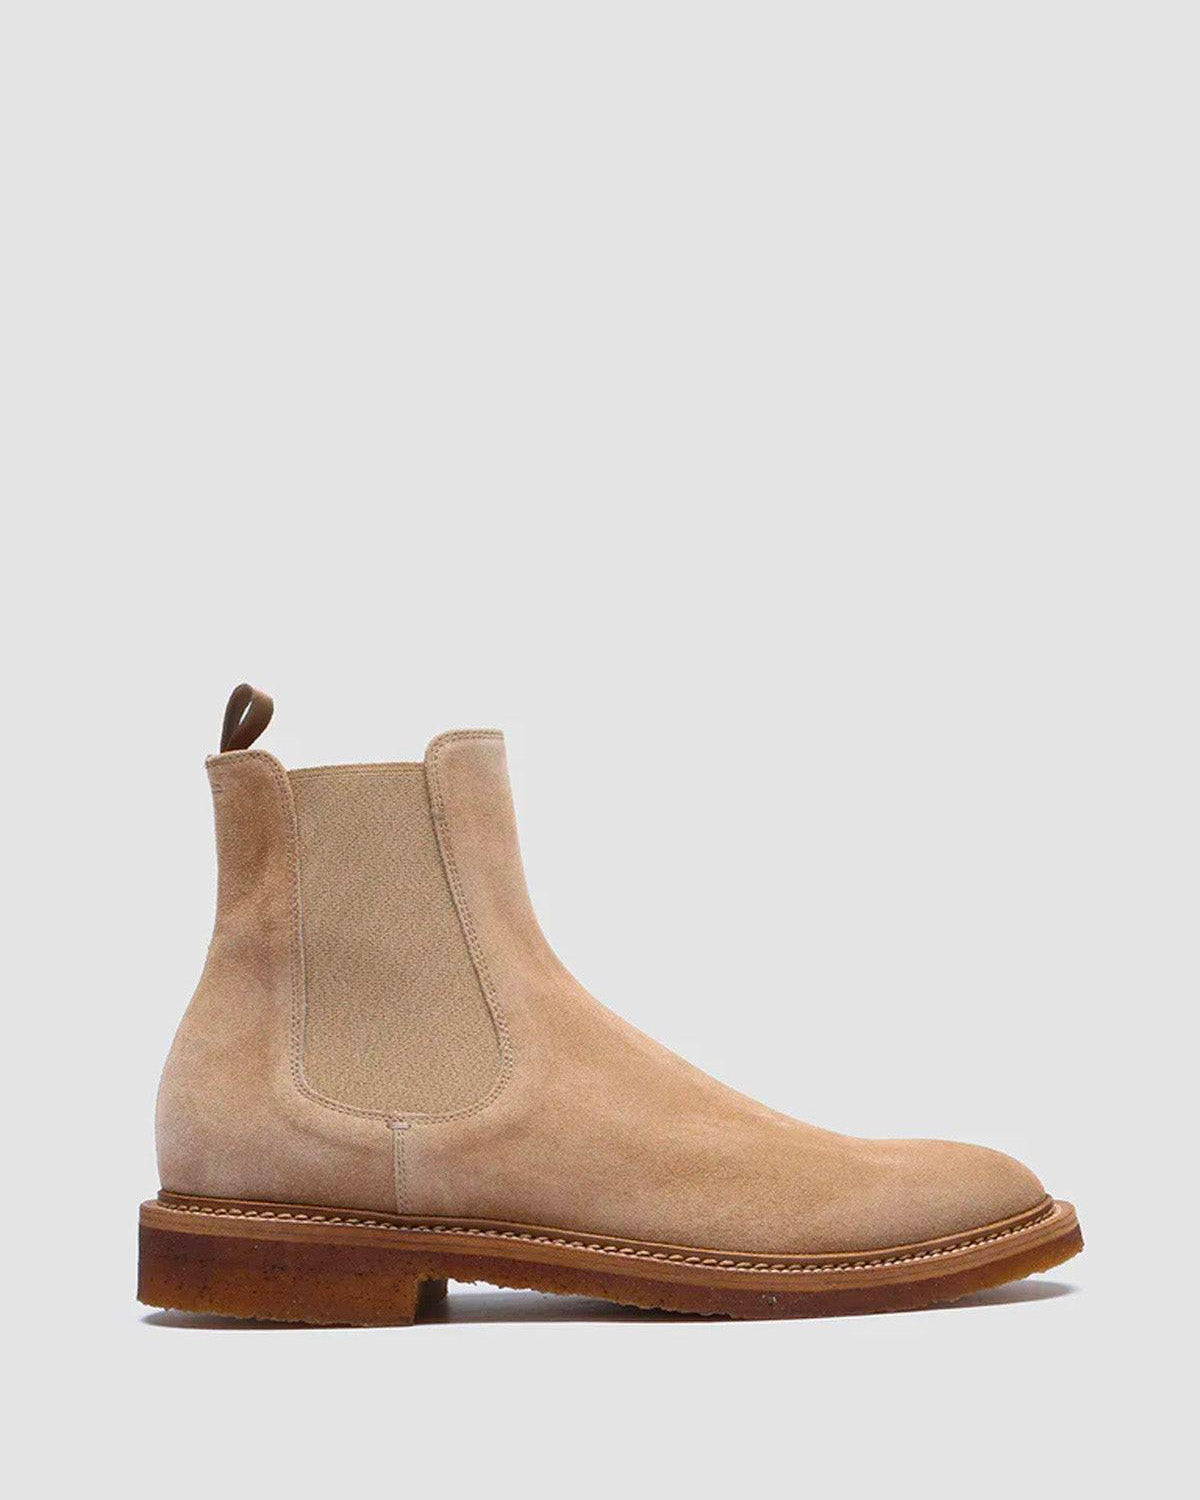 Hopkins Crepe 117 Boots - Taupe